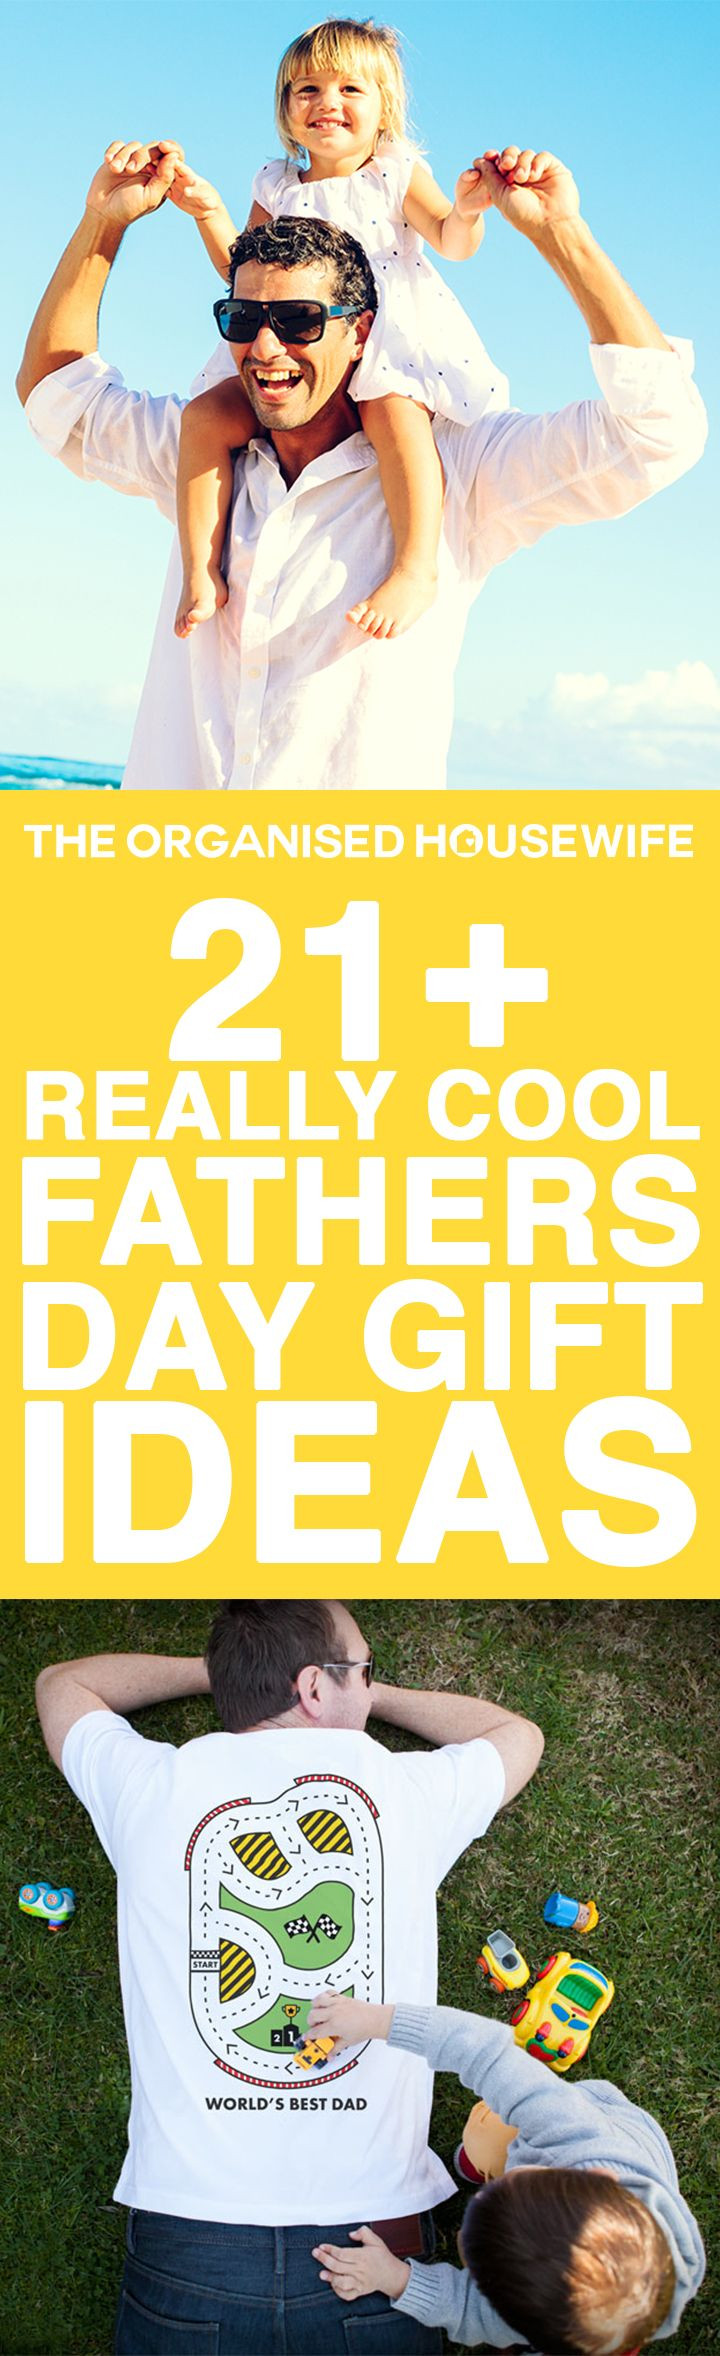 Cool Father Day Gift Ideas
 17 Best ideas about Cool Fathers Day Gifts on Pinterest